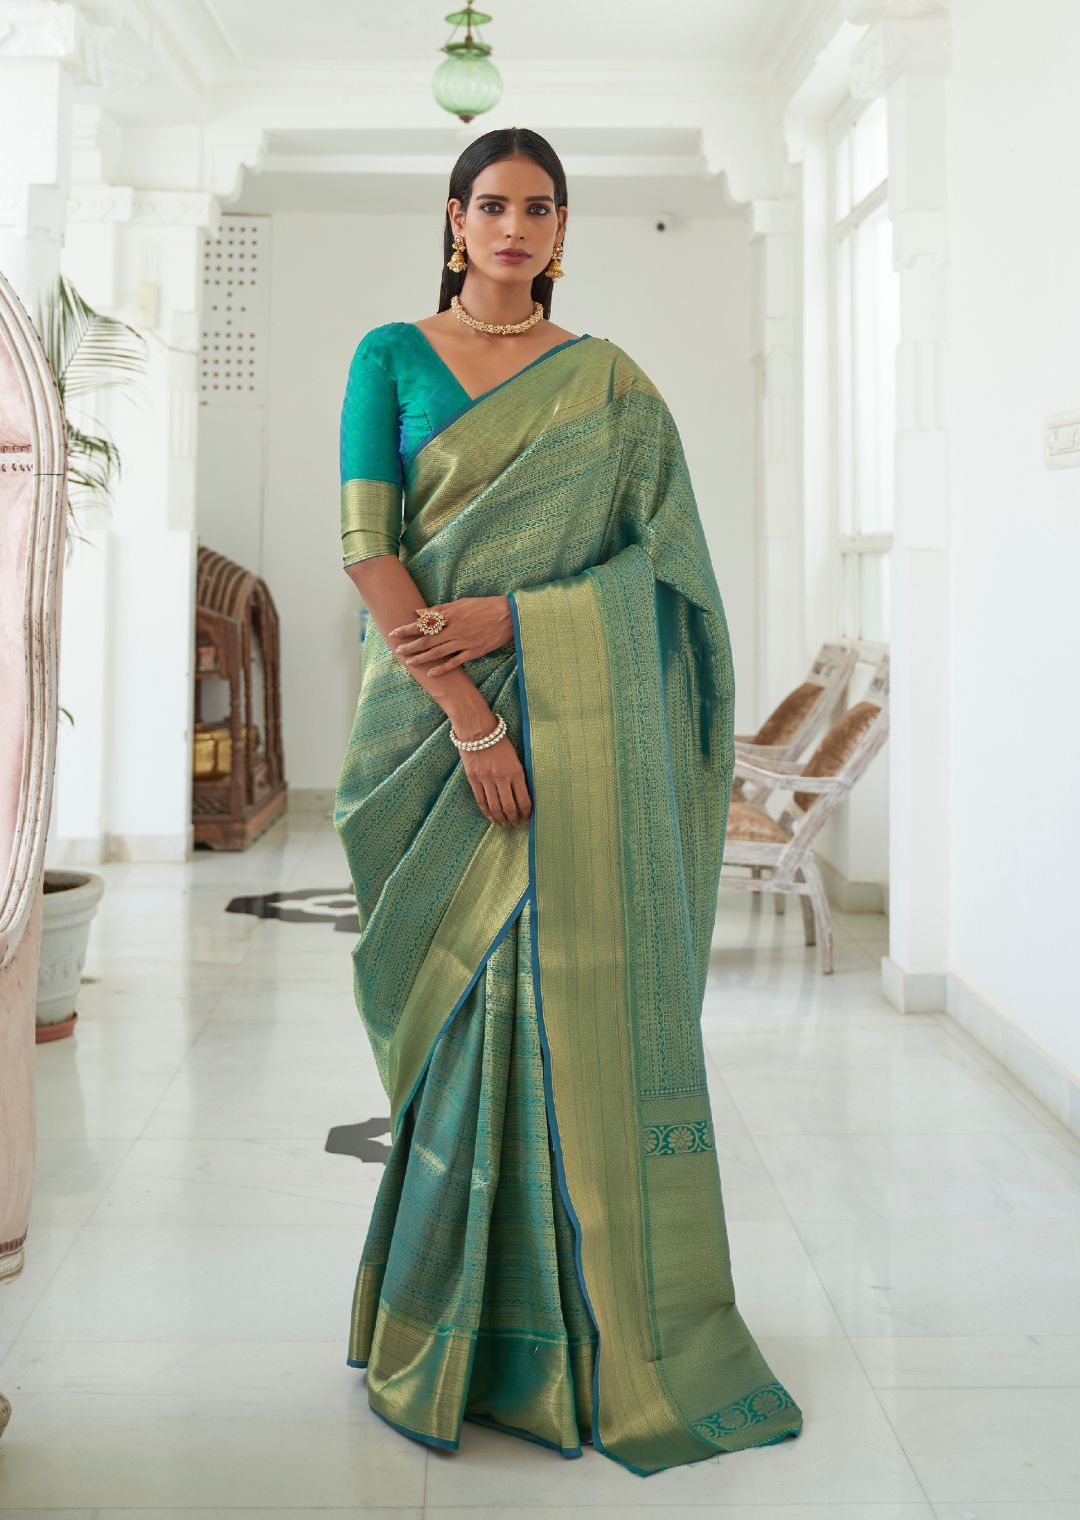 Indian Wedding Saree - Beautiful green jacquard saree enhanced with blue &  golden woven traces and paired up with blue blouse. Peacock shades! . .  Product code: 1570528 . . . #IndianWeddingSaree #